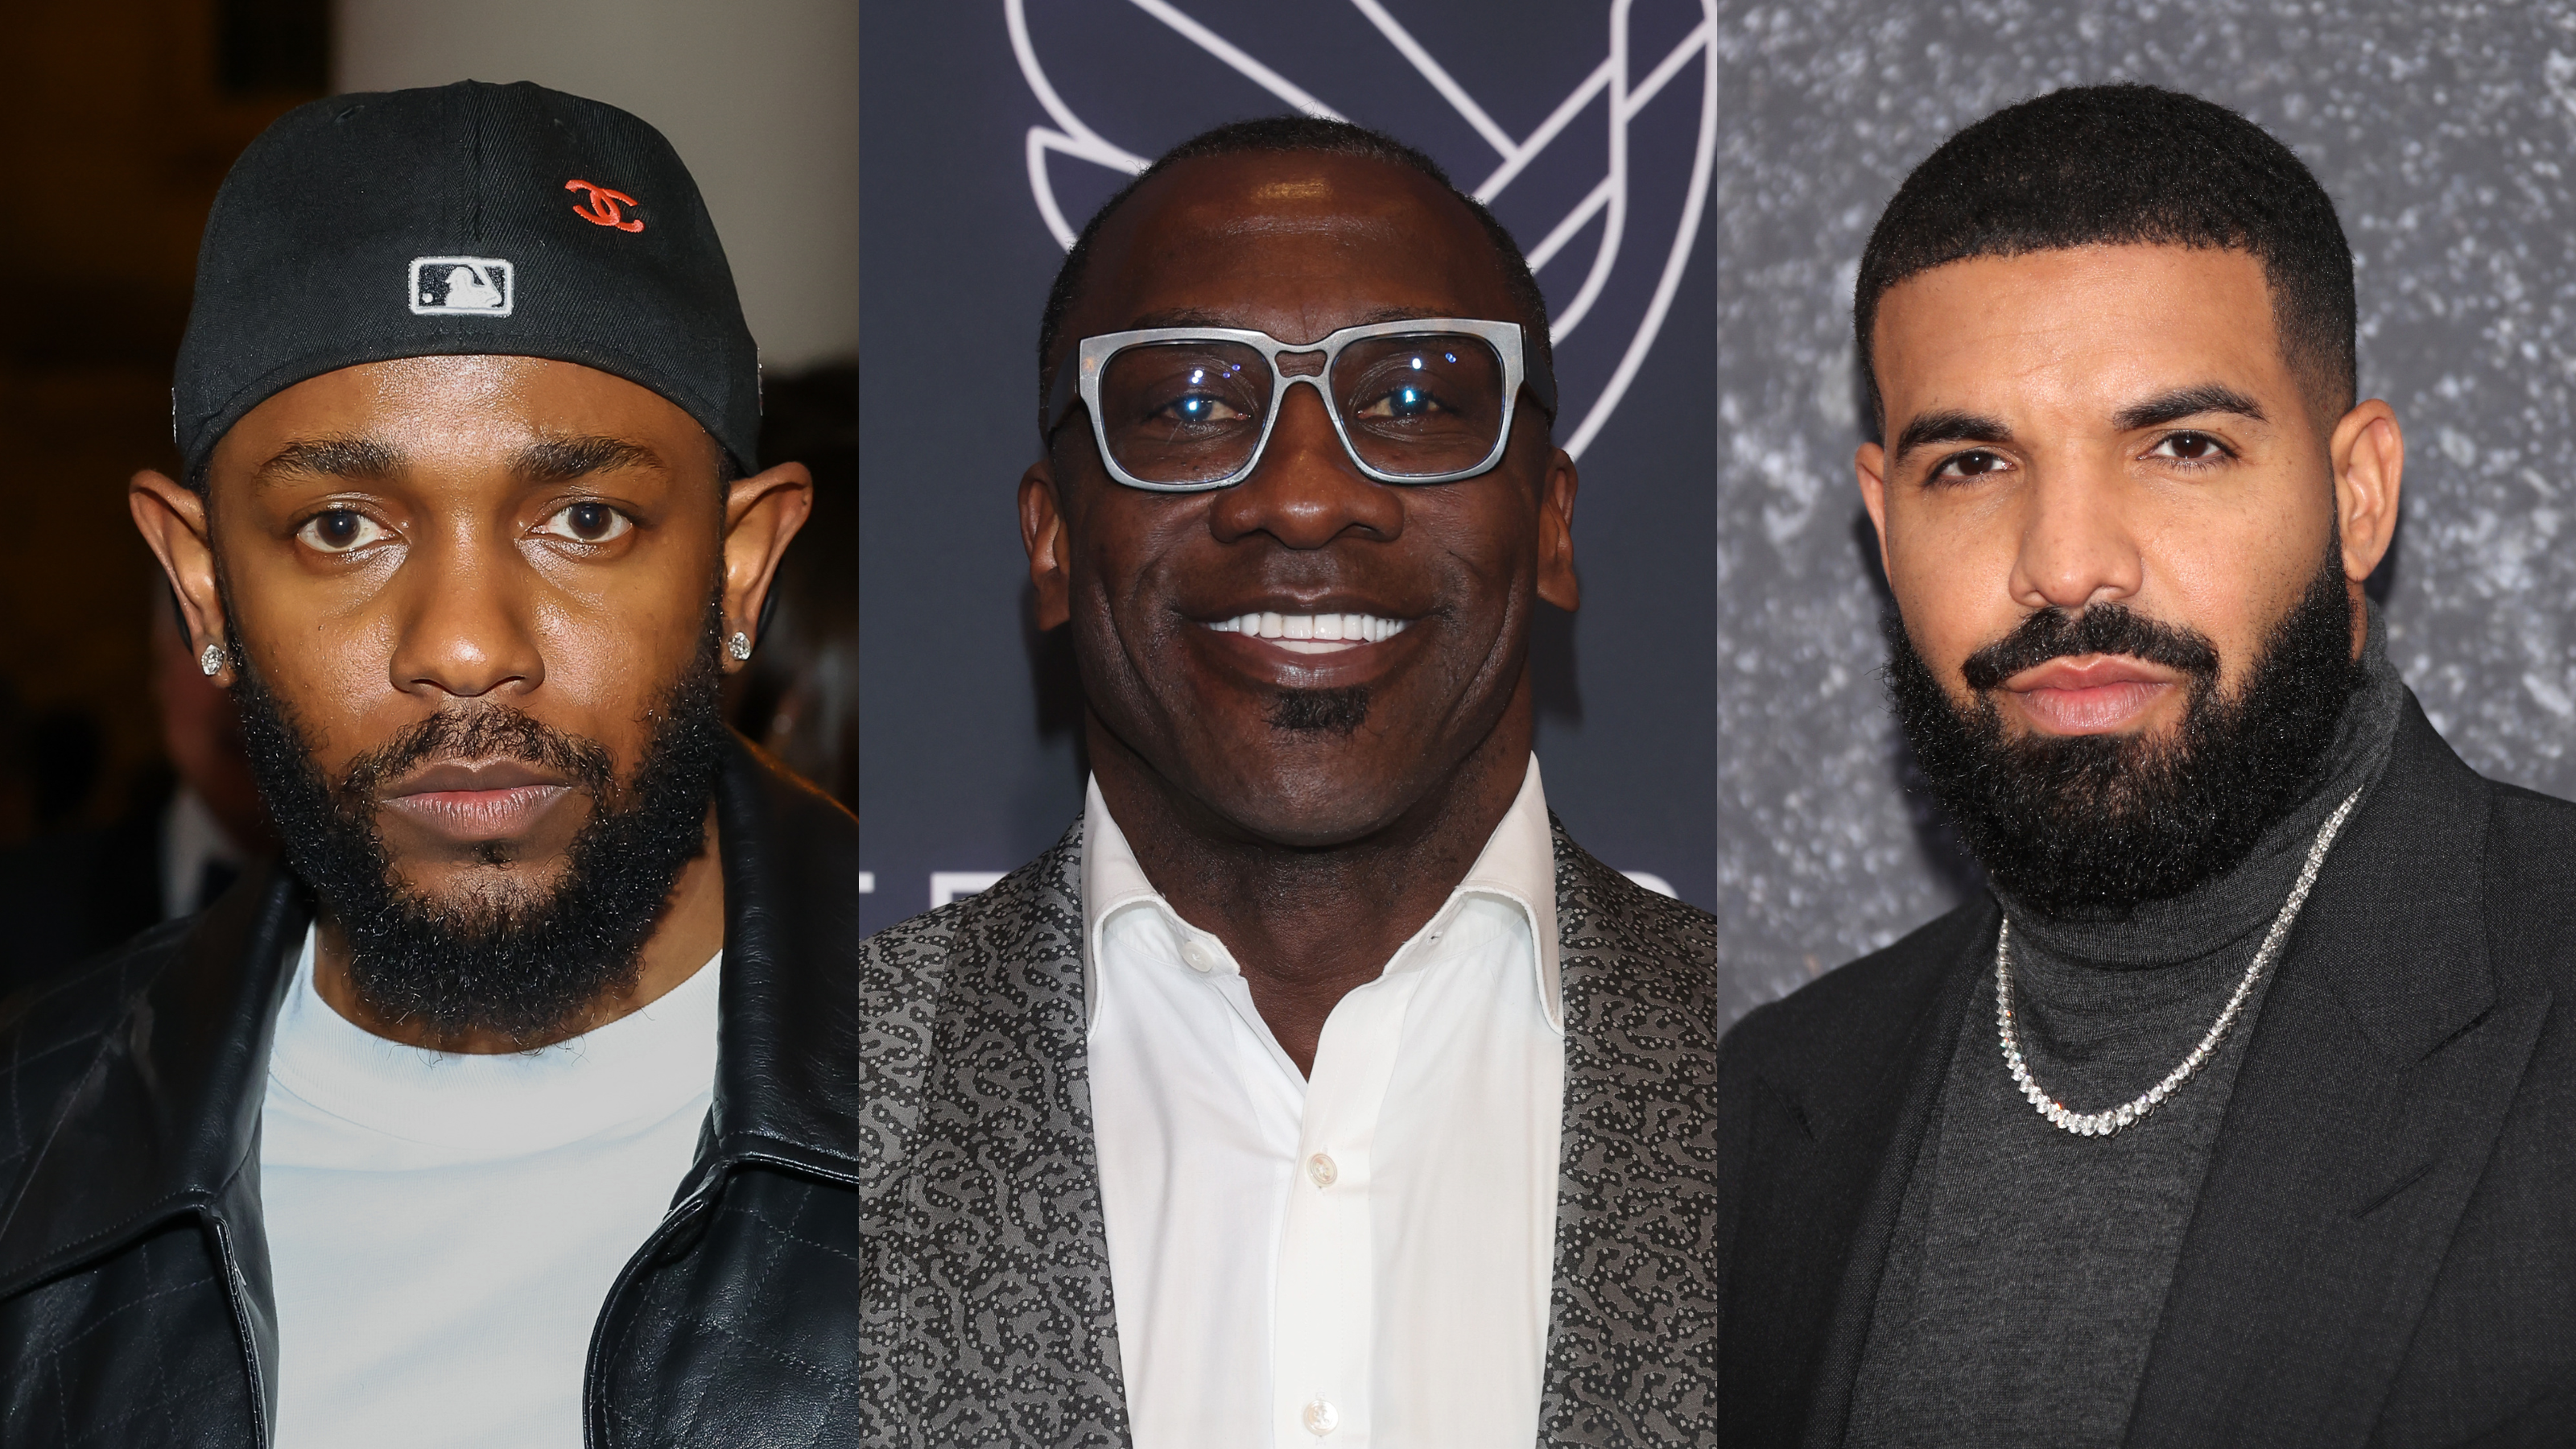 Shannon Sharpe Reacts To Kendrick Lamar Accusing Drake Of Being A “Pedophile”